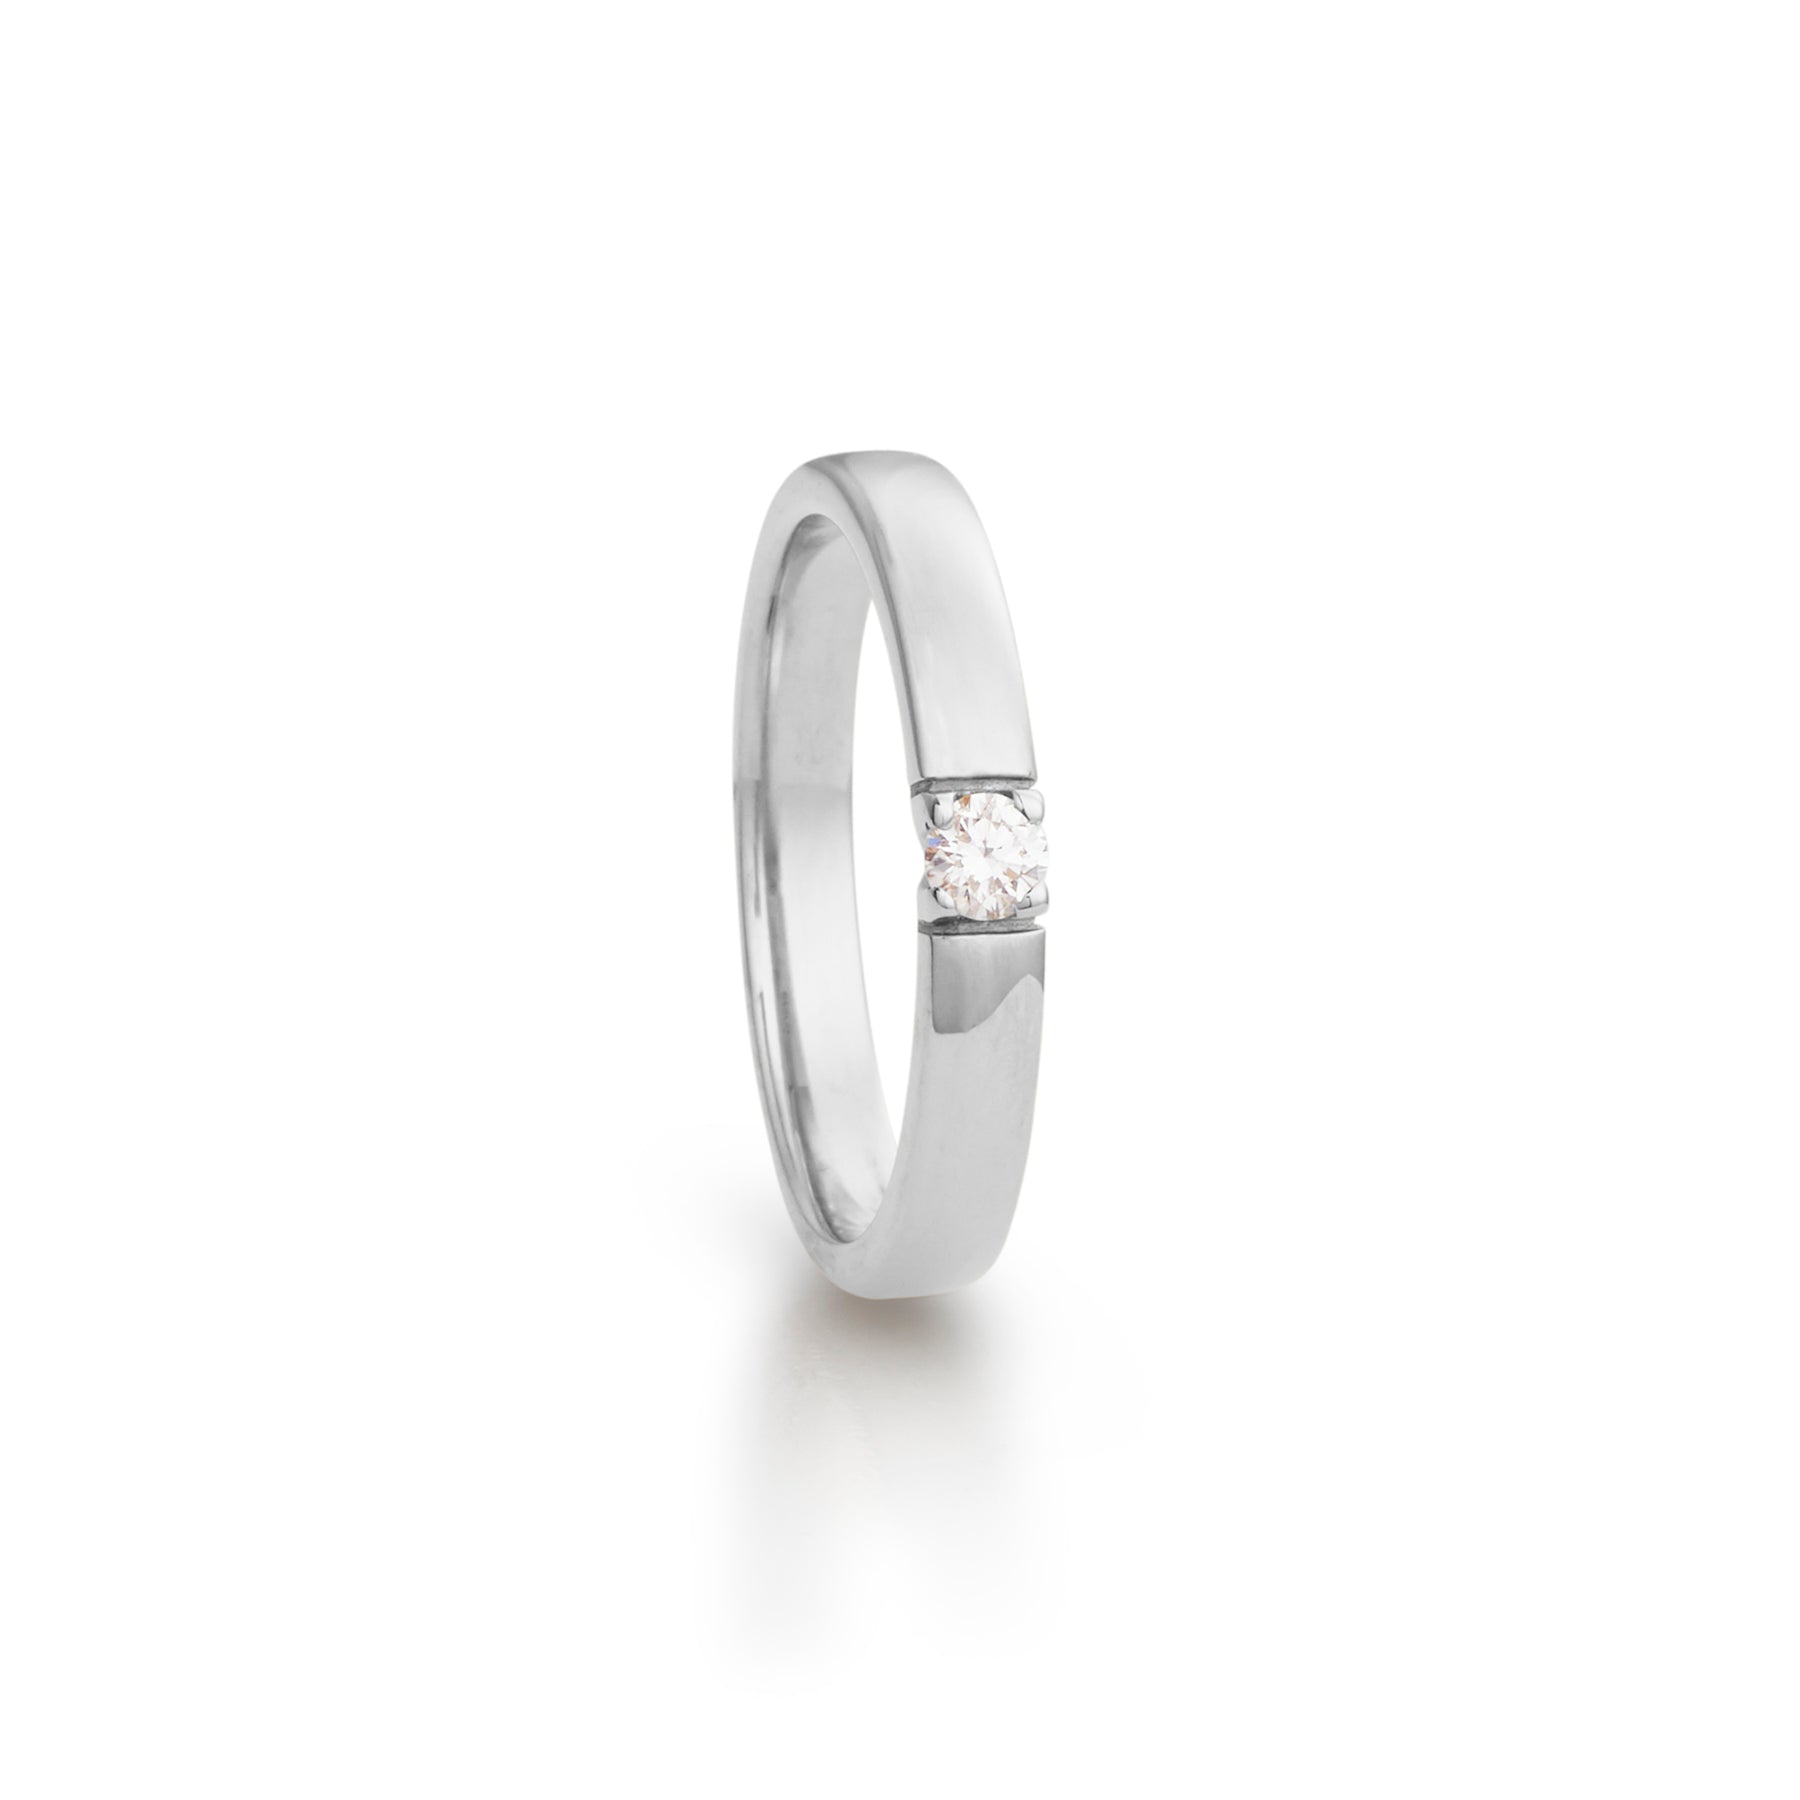 Alliance ring in white gold with diamond